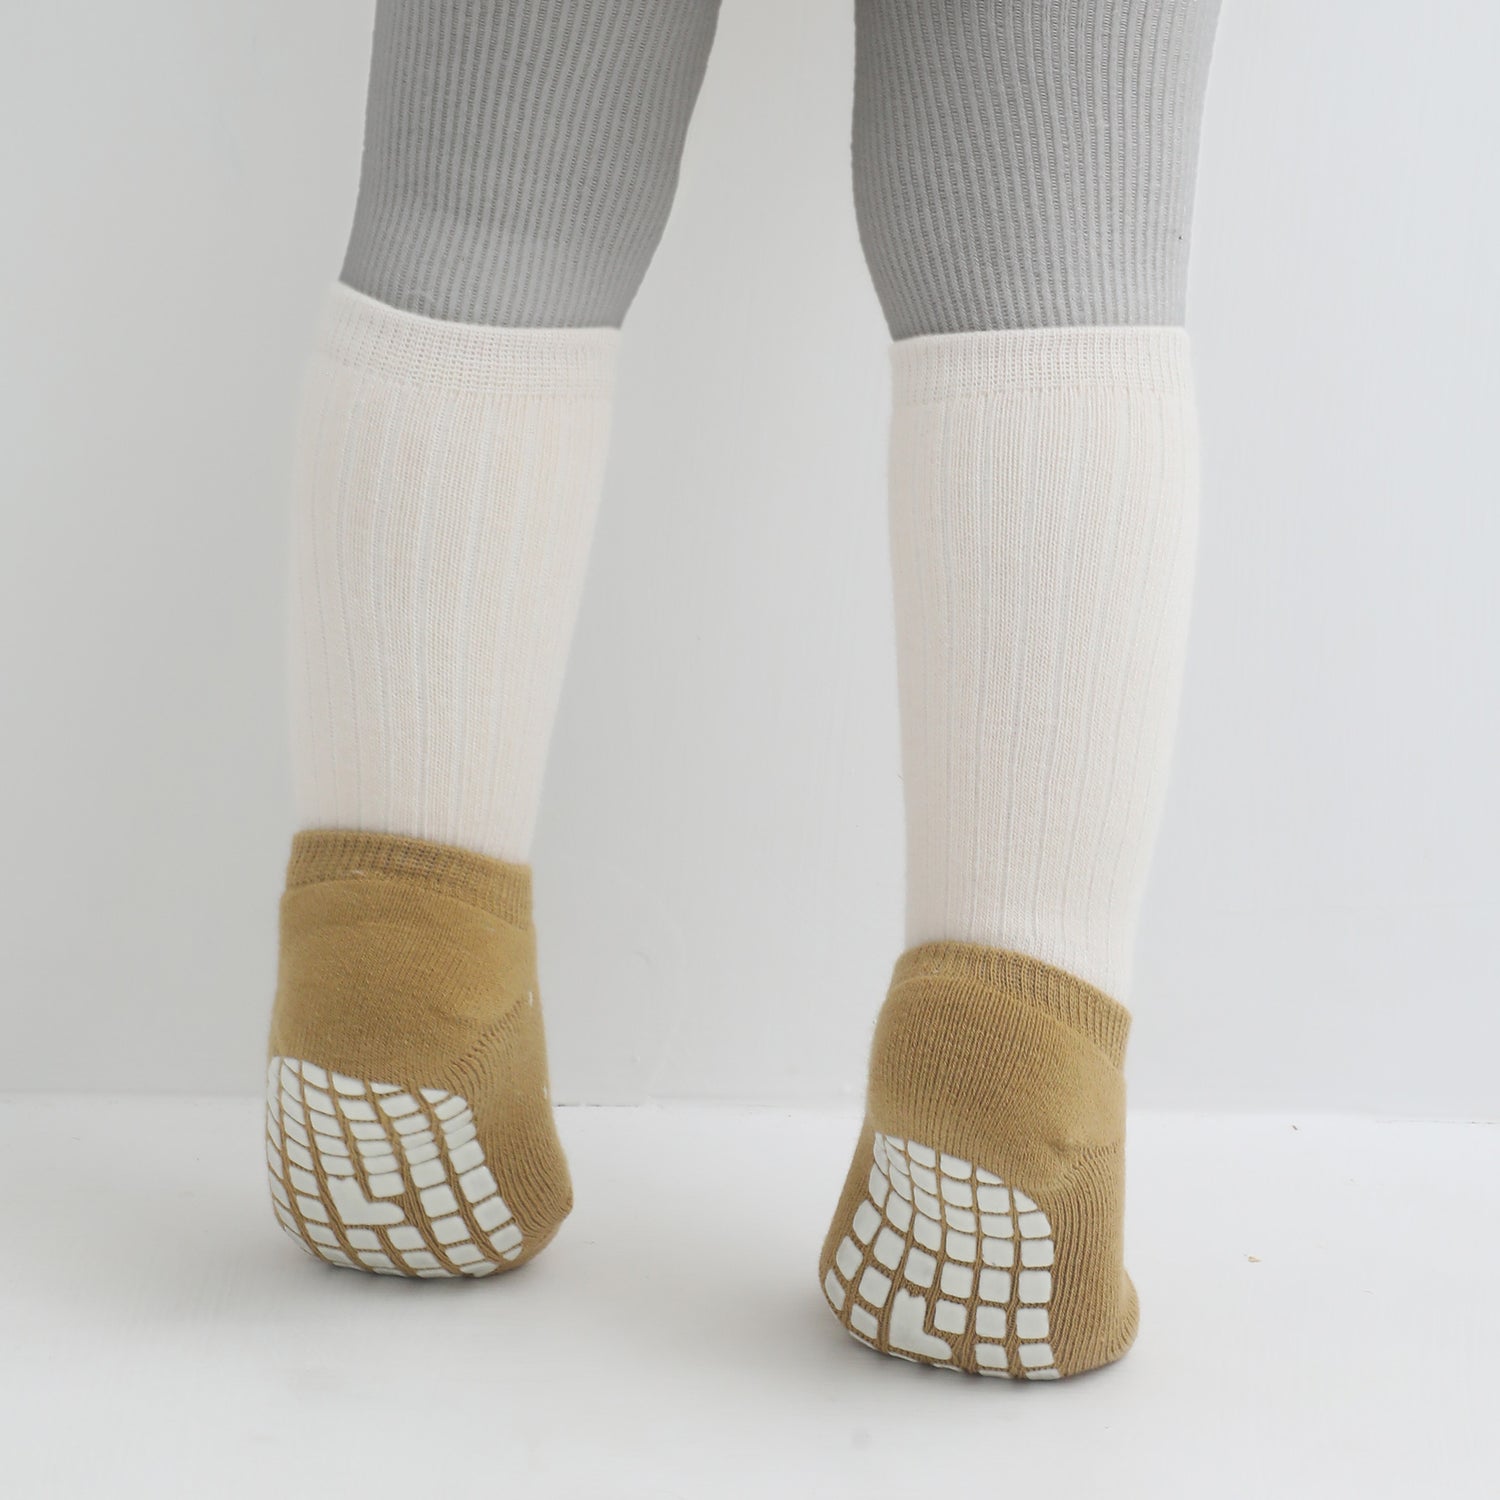 Reliable baby socks crafted to stay on tiny feet, preventing slips and falls.